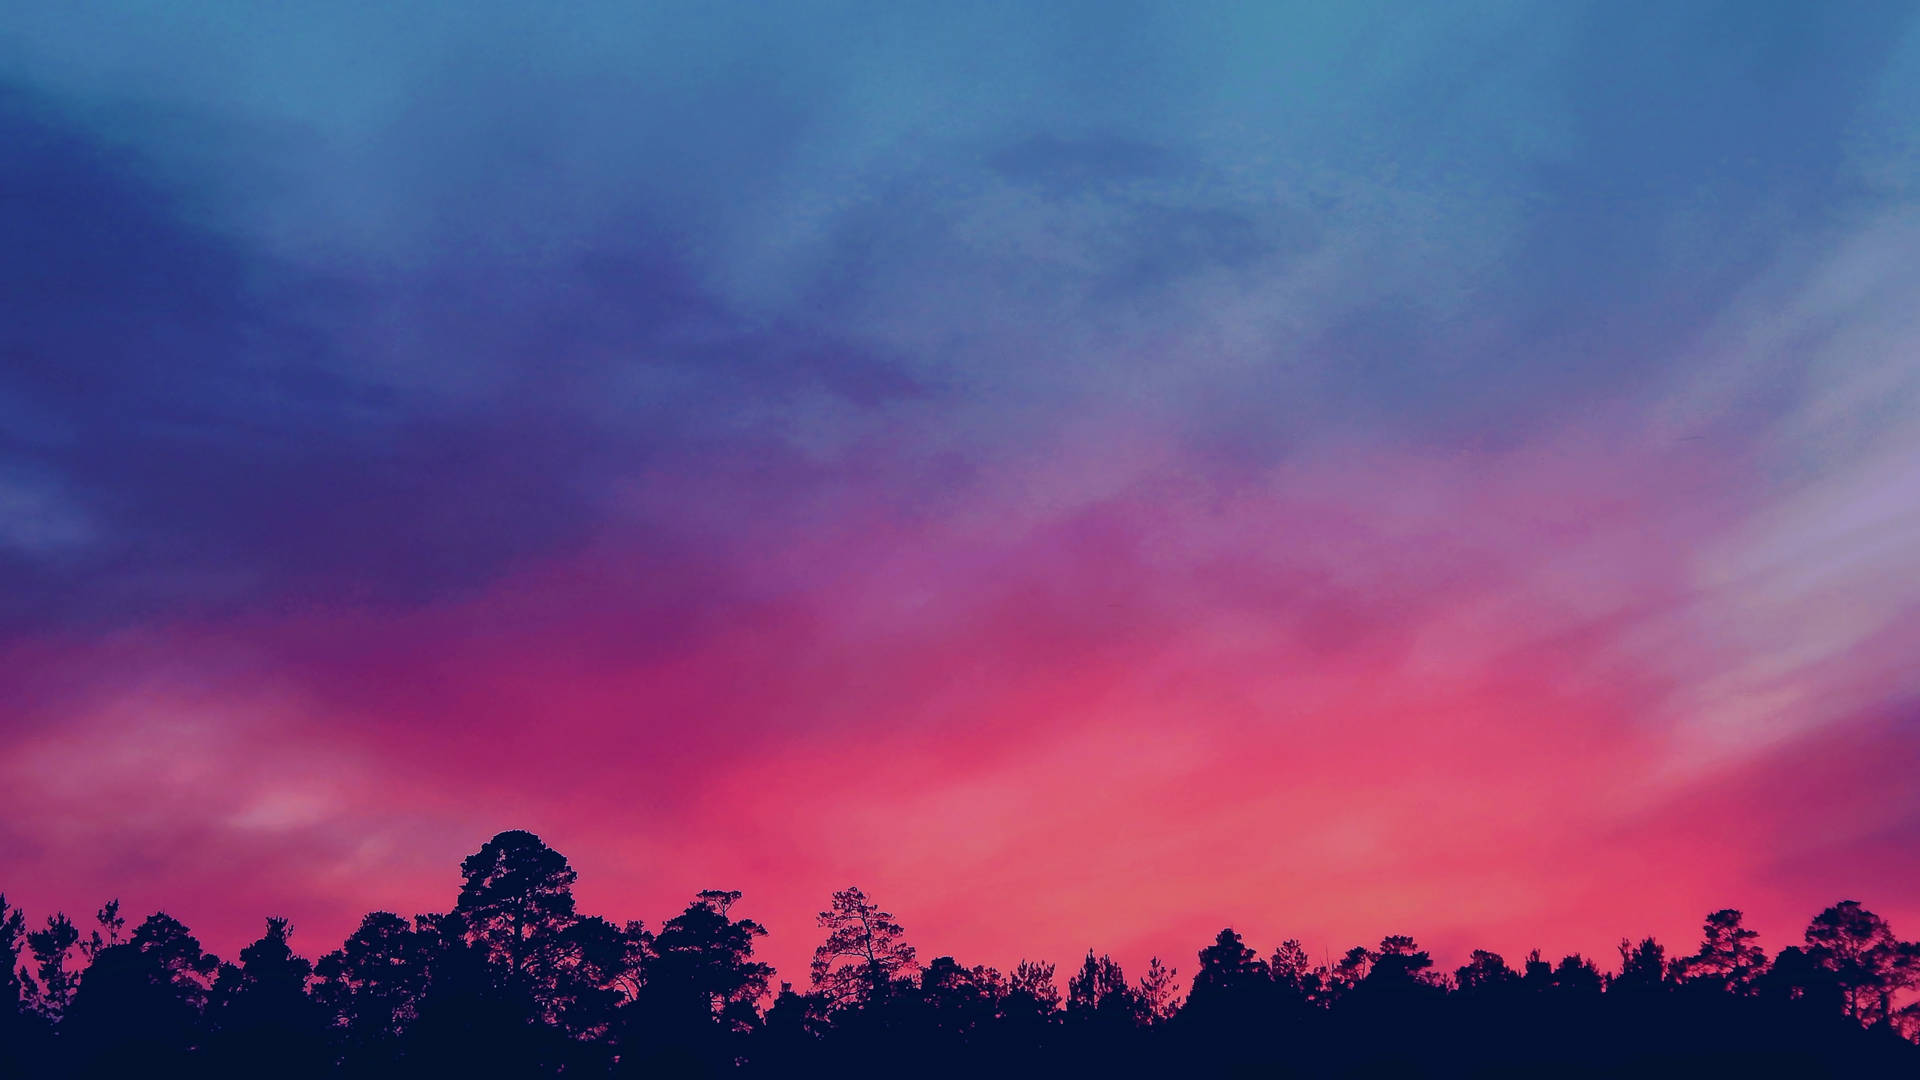 Aesthetic Sky In Pink And Blue Wallpaper